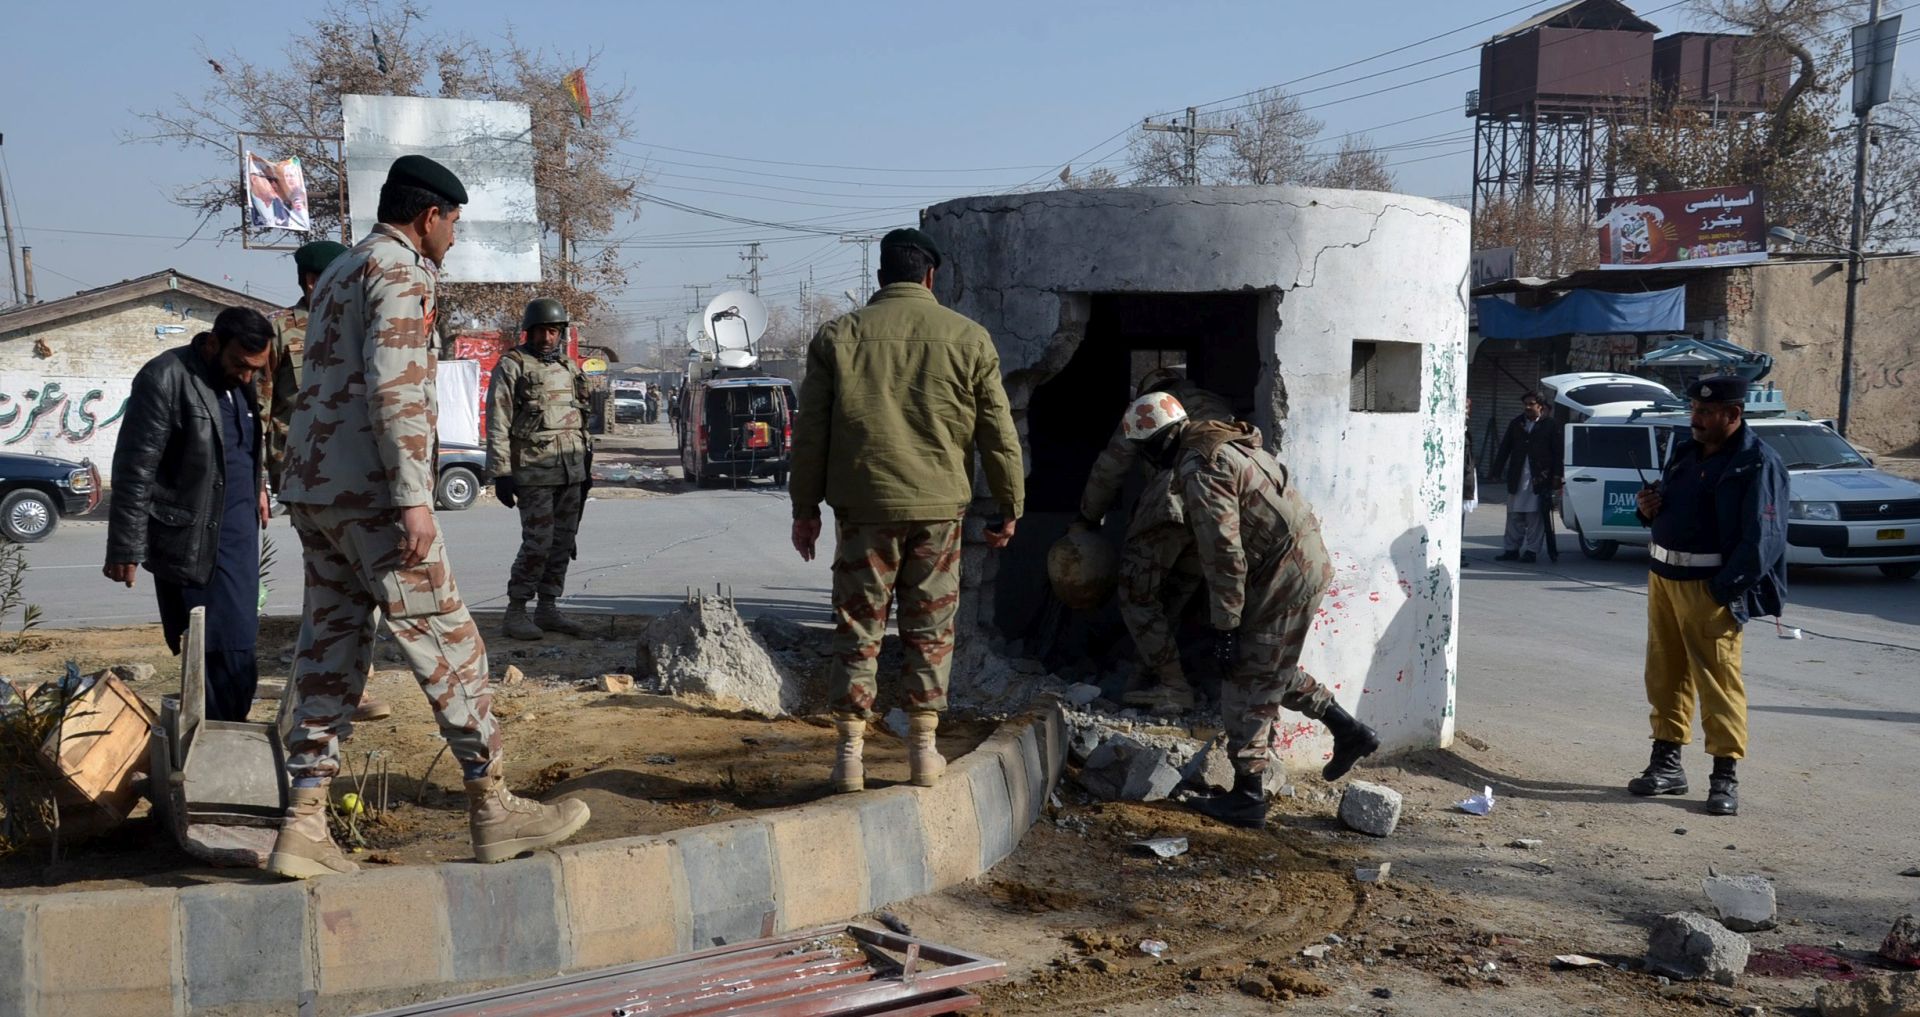 epa05065835 Pakistani security officials inspect the site of a bomb blast that targeted the checkpost of Frontier Corps in Quetta, Balochistan province, Pakistan, 12 December 2015. According to media reports, one Frontier Corps (FC) was killed three others were wounded in a bomb blast.  EPA/JAMAL TARAKAI